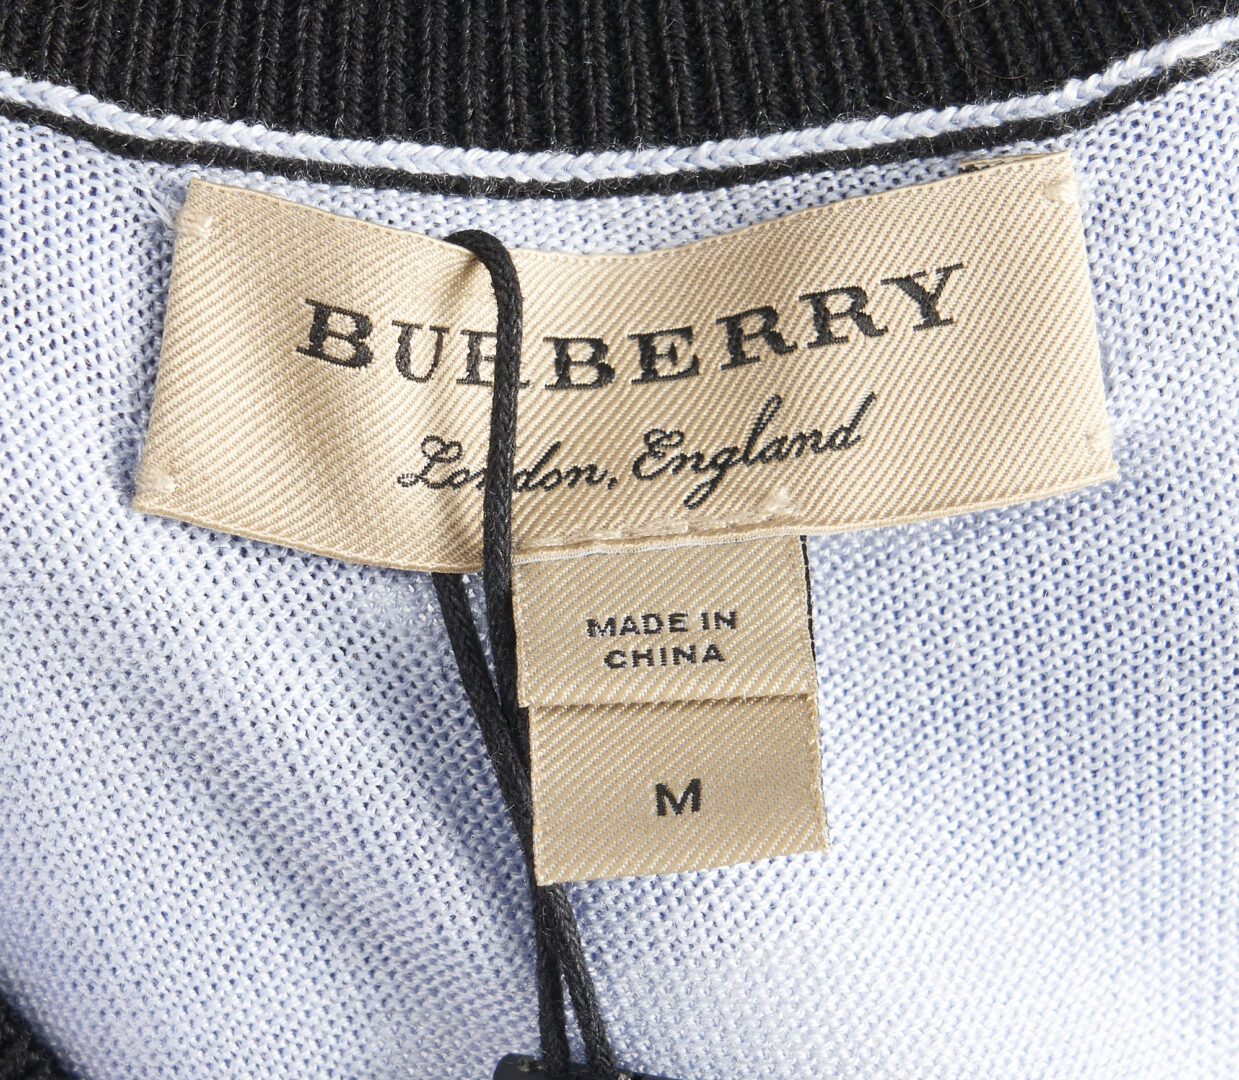 Lot 1238: 4 Burberry Garments, incl. Cashmere Sweater